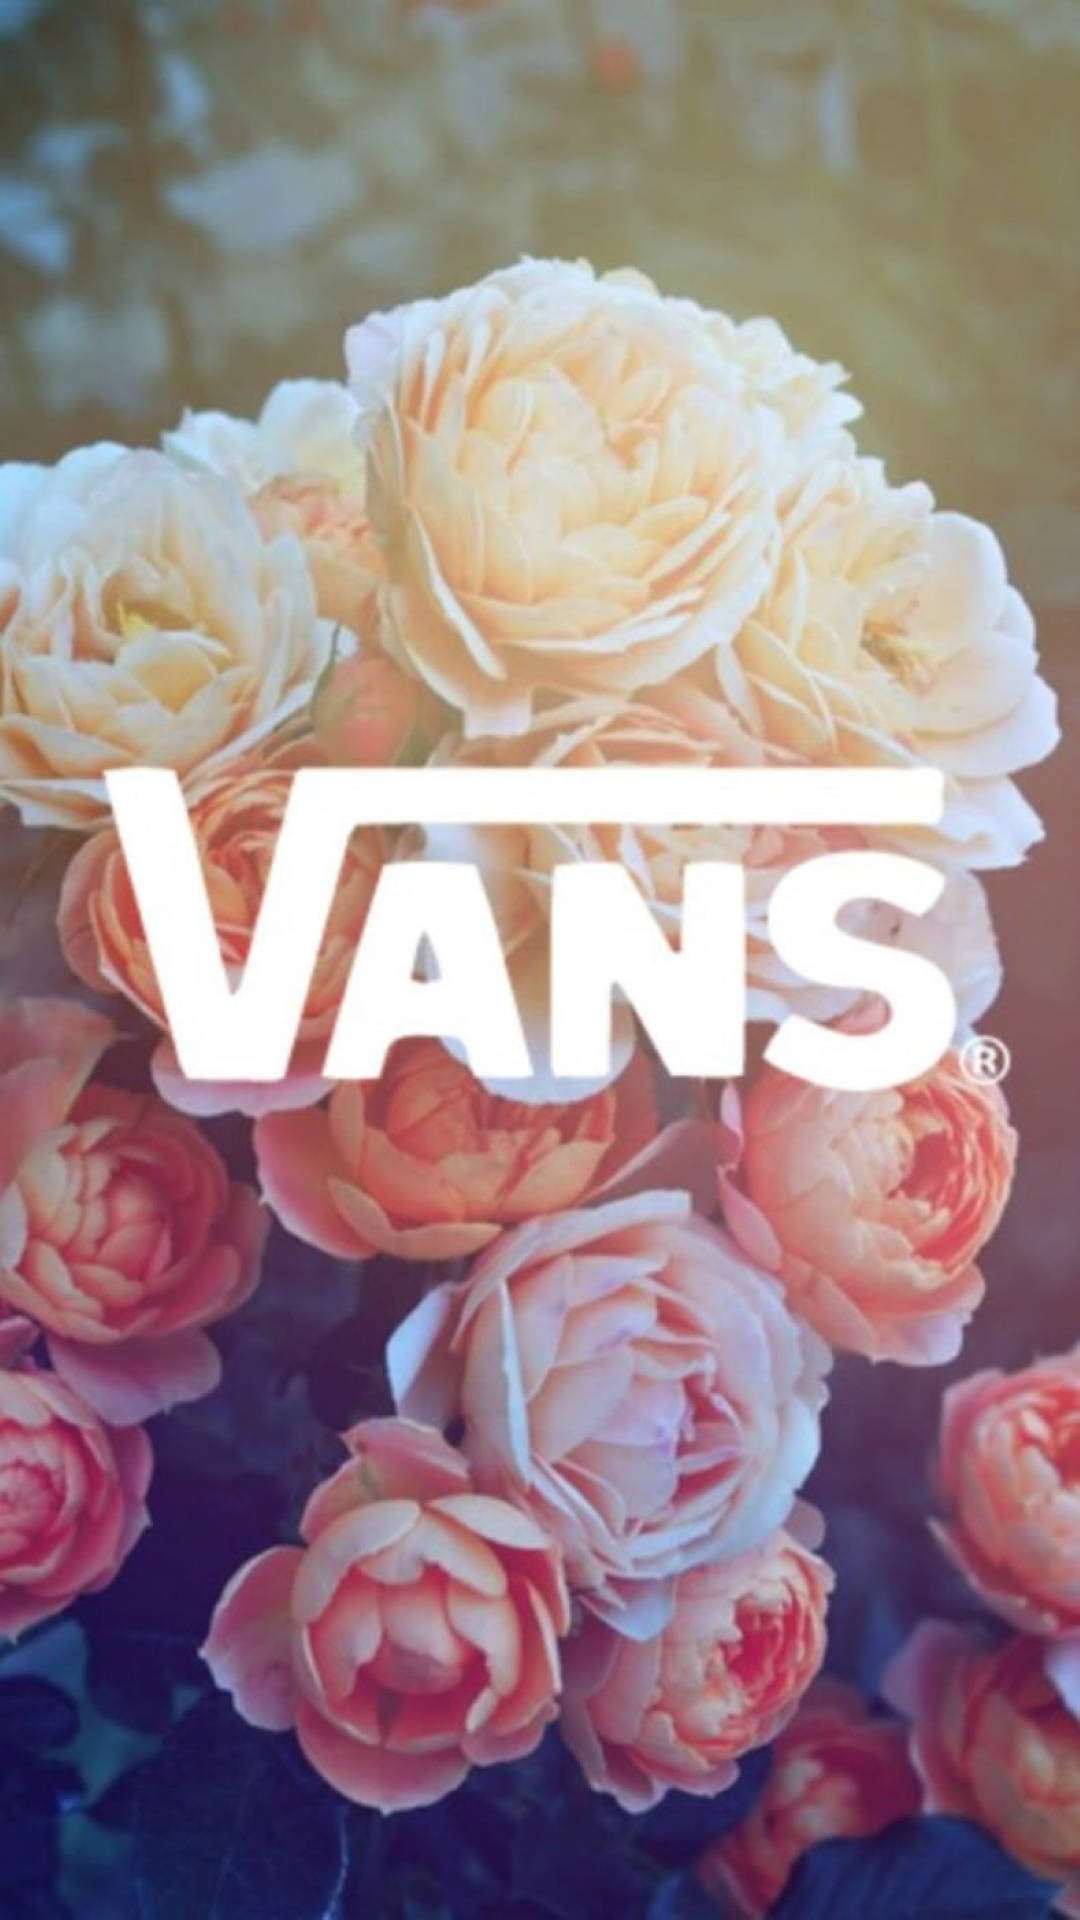 Vans Logo With Aesthetic Flowers